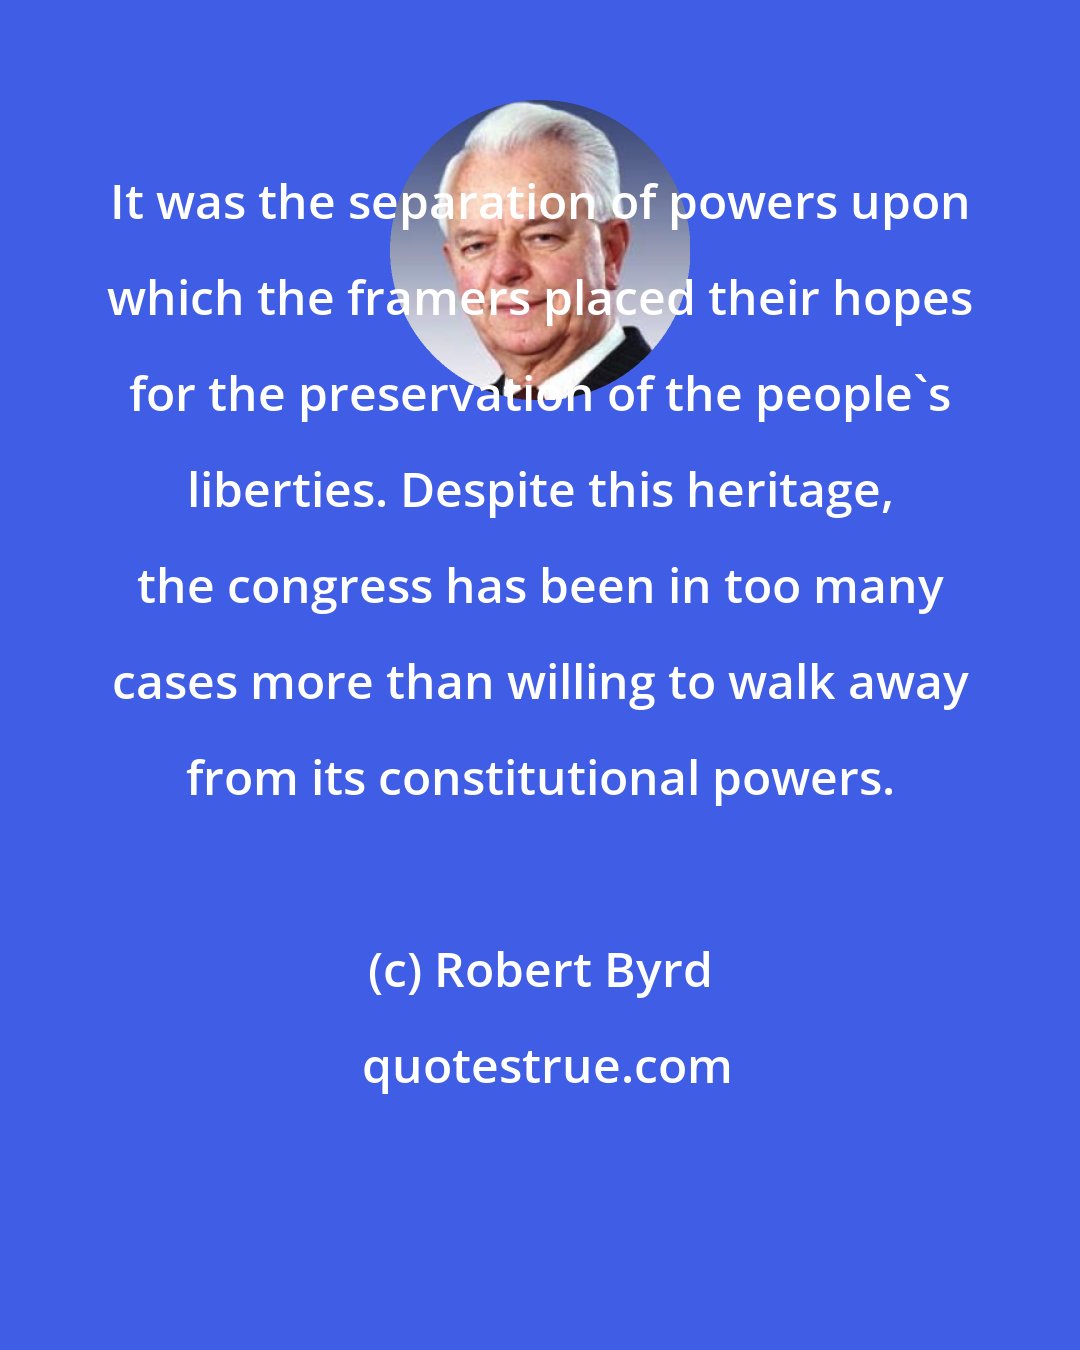 Robert Byrd: It was the separation of powers upon which the framers placed their hopes for the preservation of the people's liberties. Despite this heritage, the congress has been in too many cases more than willing to walk away from its constitutional powers.